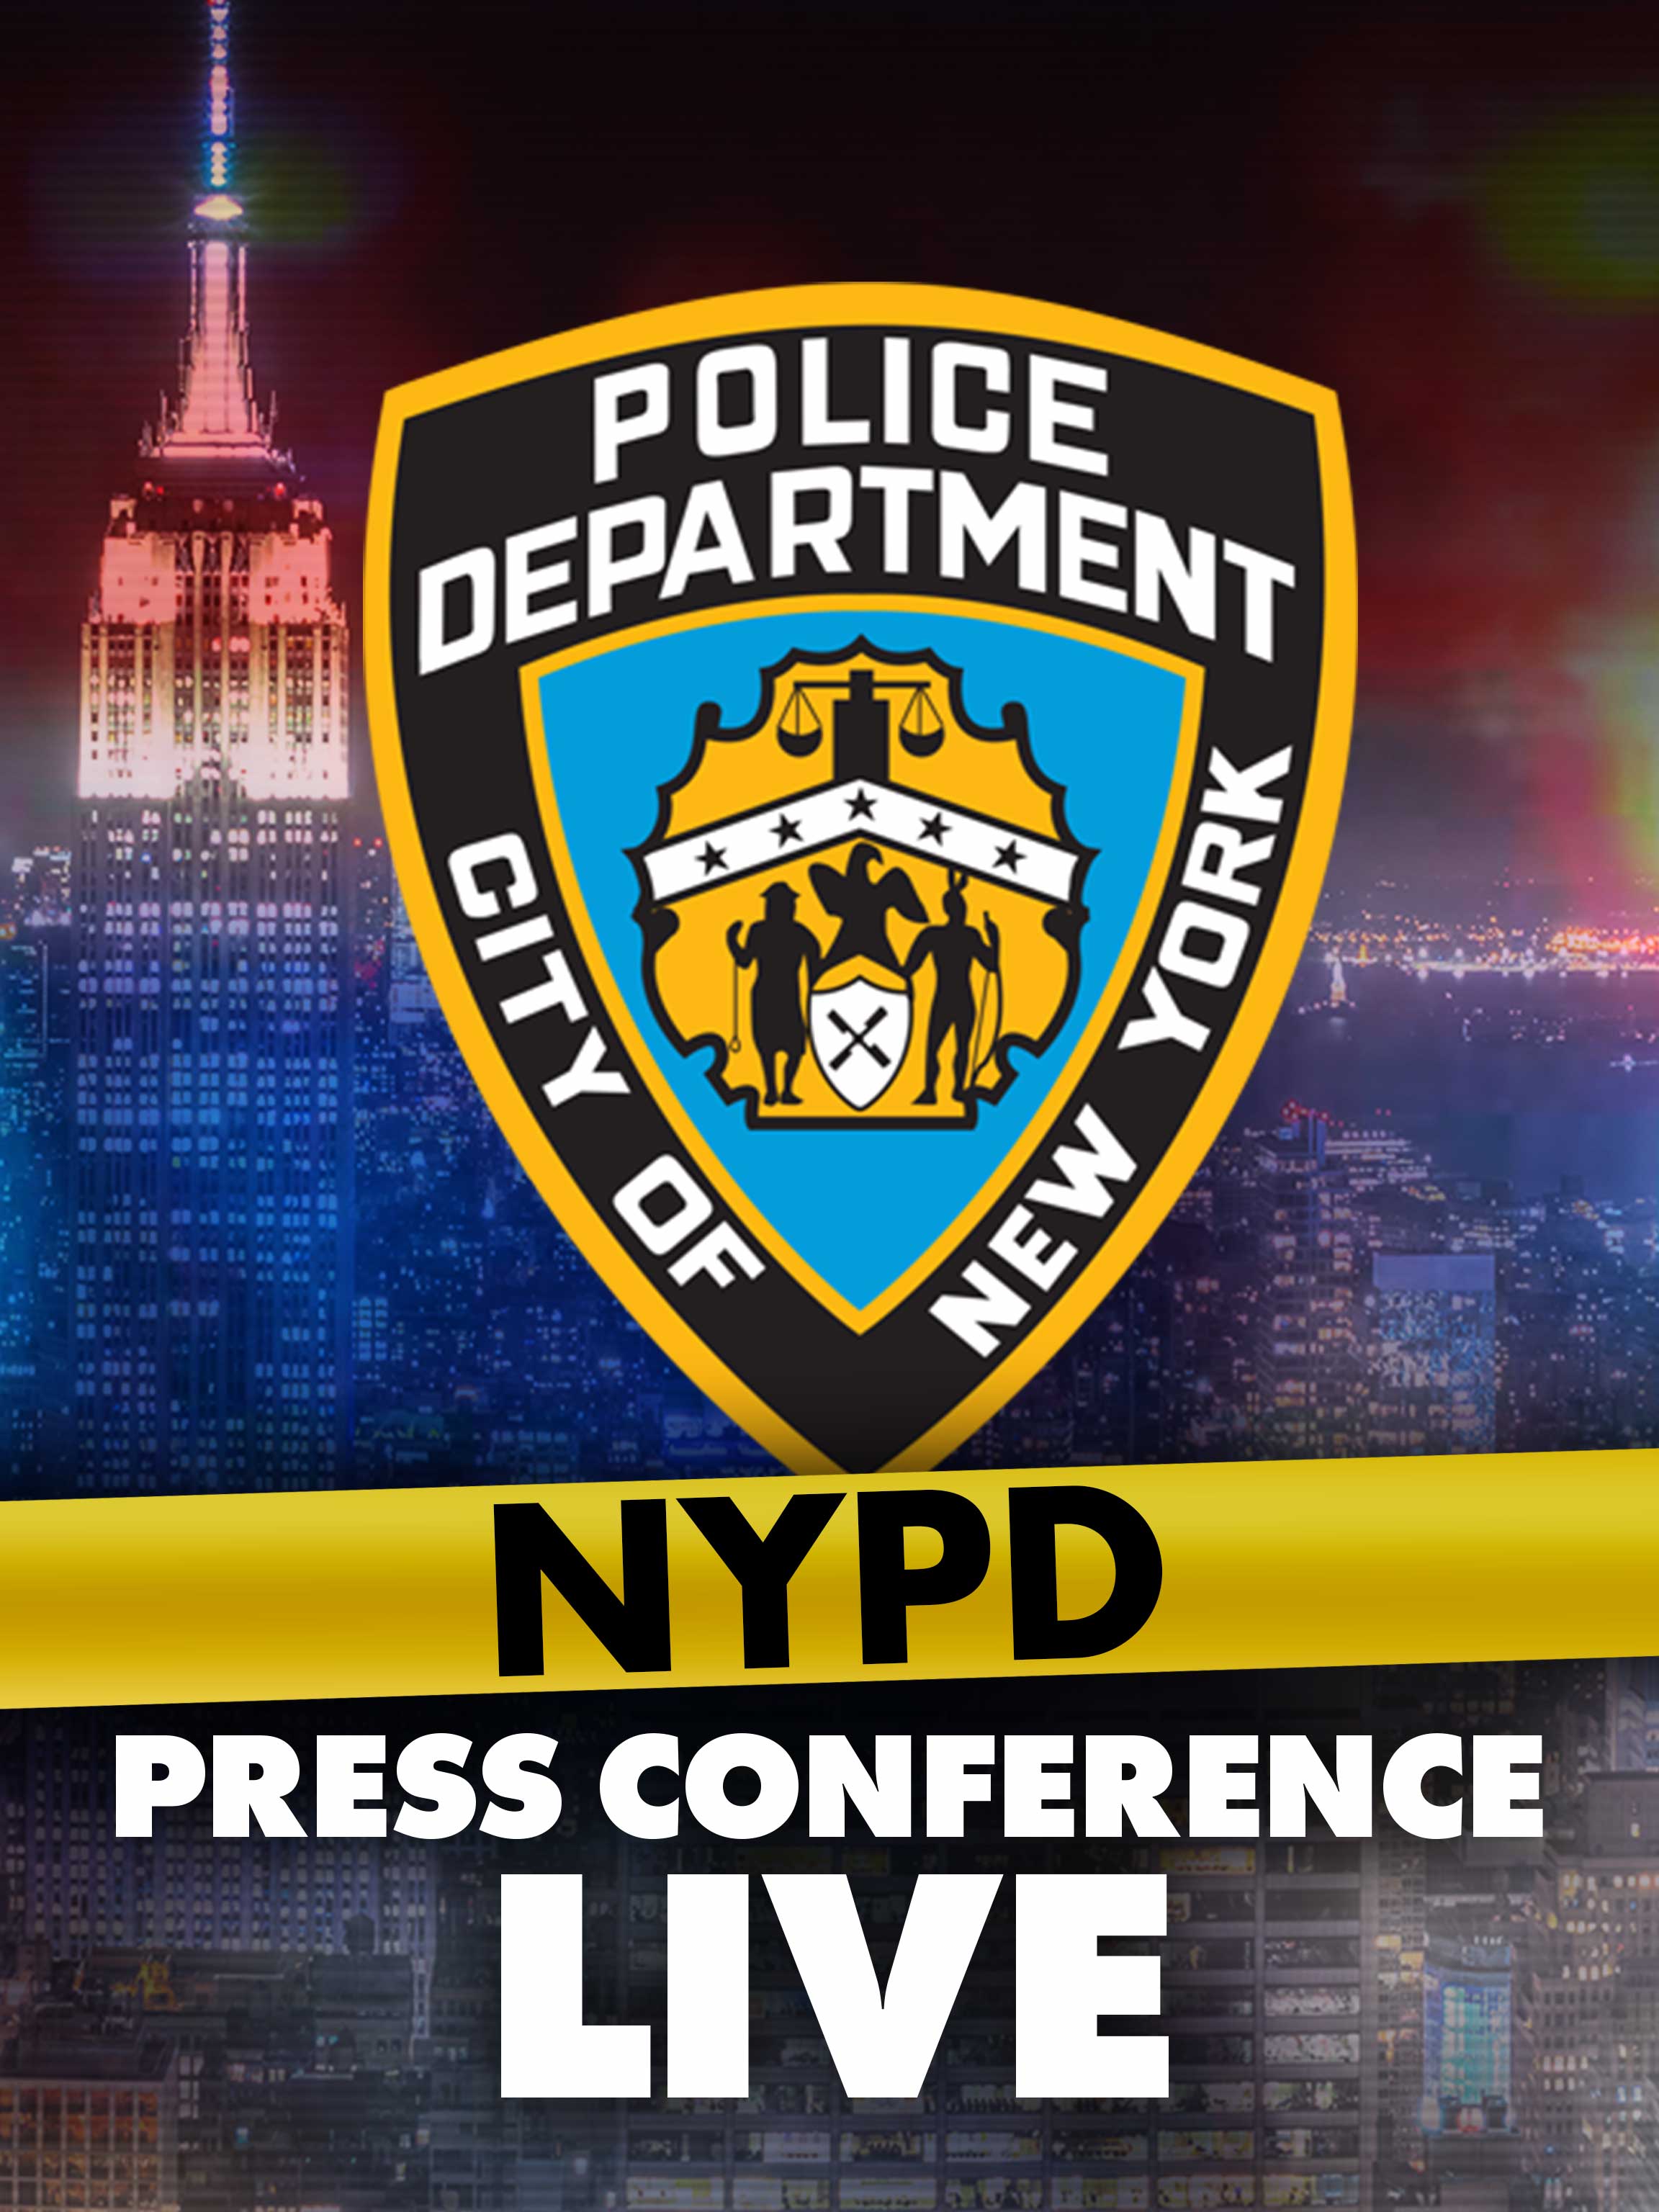 NYPD Press Conference Live dcg-mark-poster